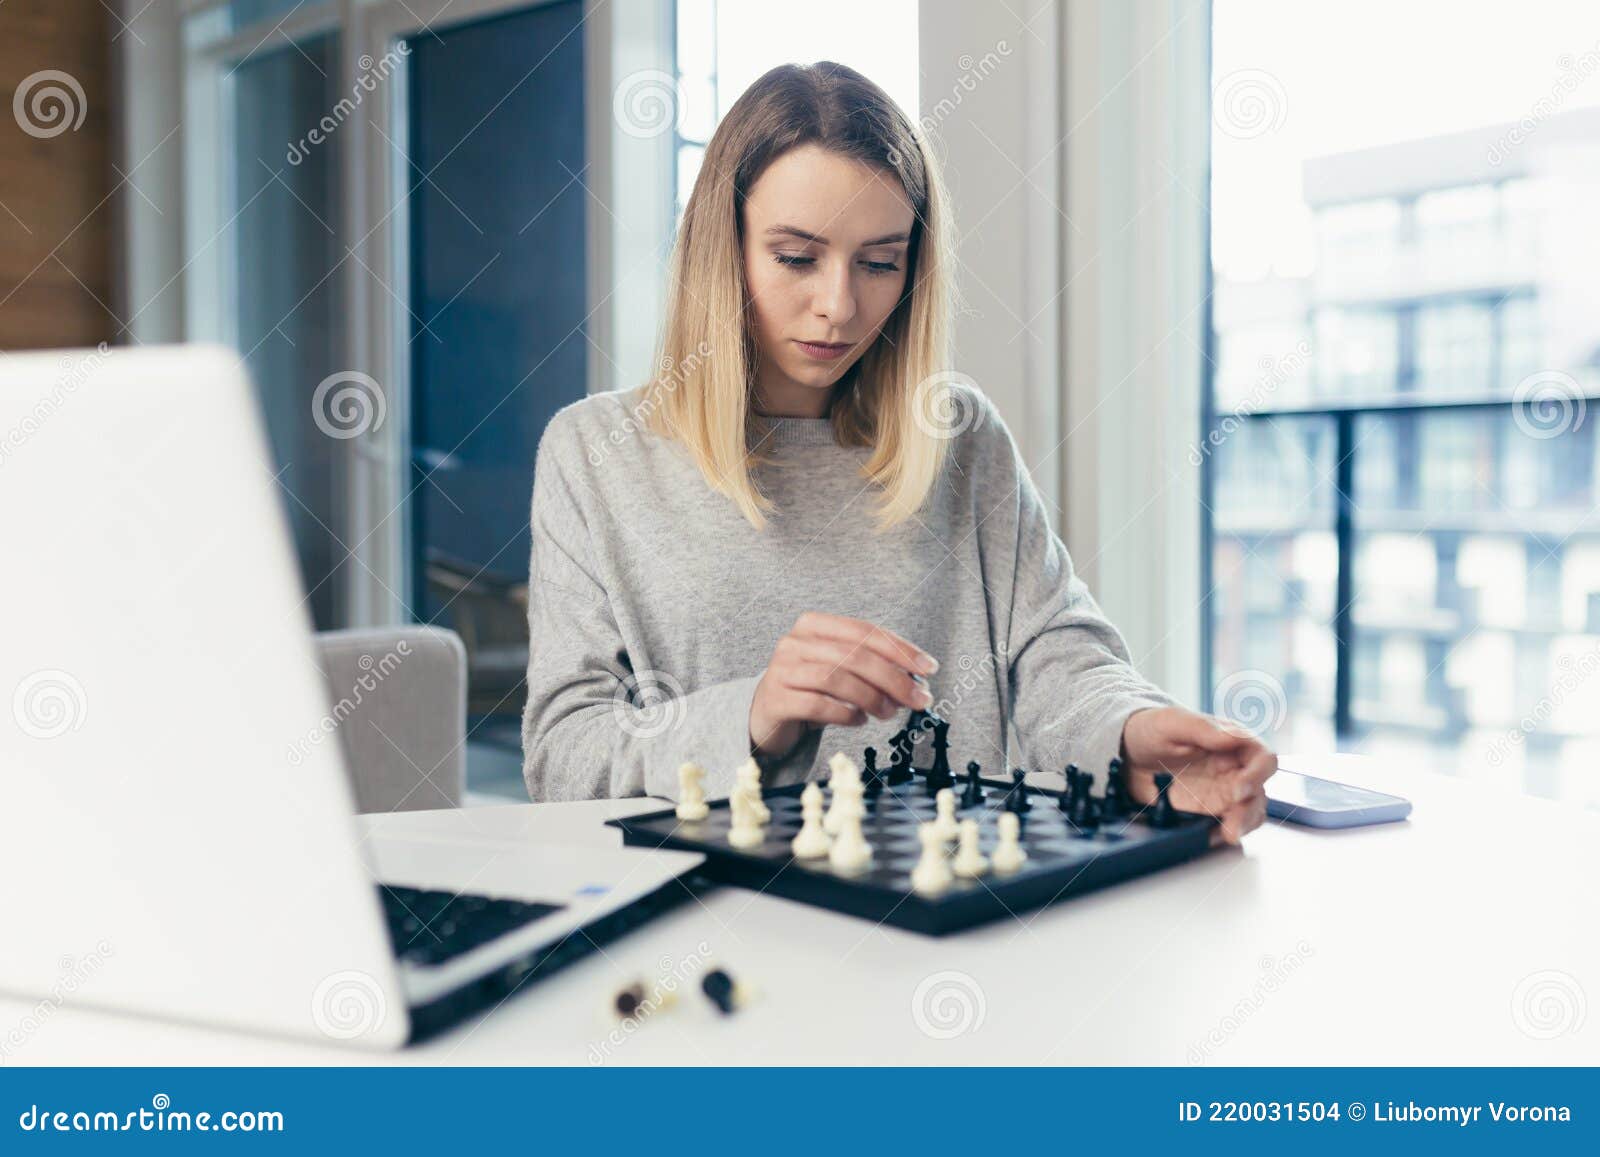 Blonde Woman Playing Chess Online Uses Laptop, Thoughtfully Makes